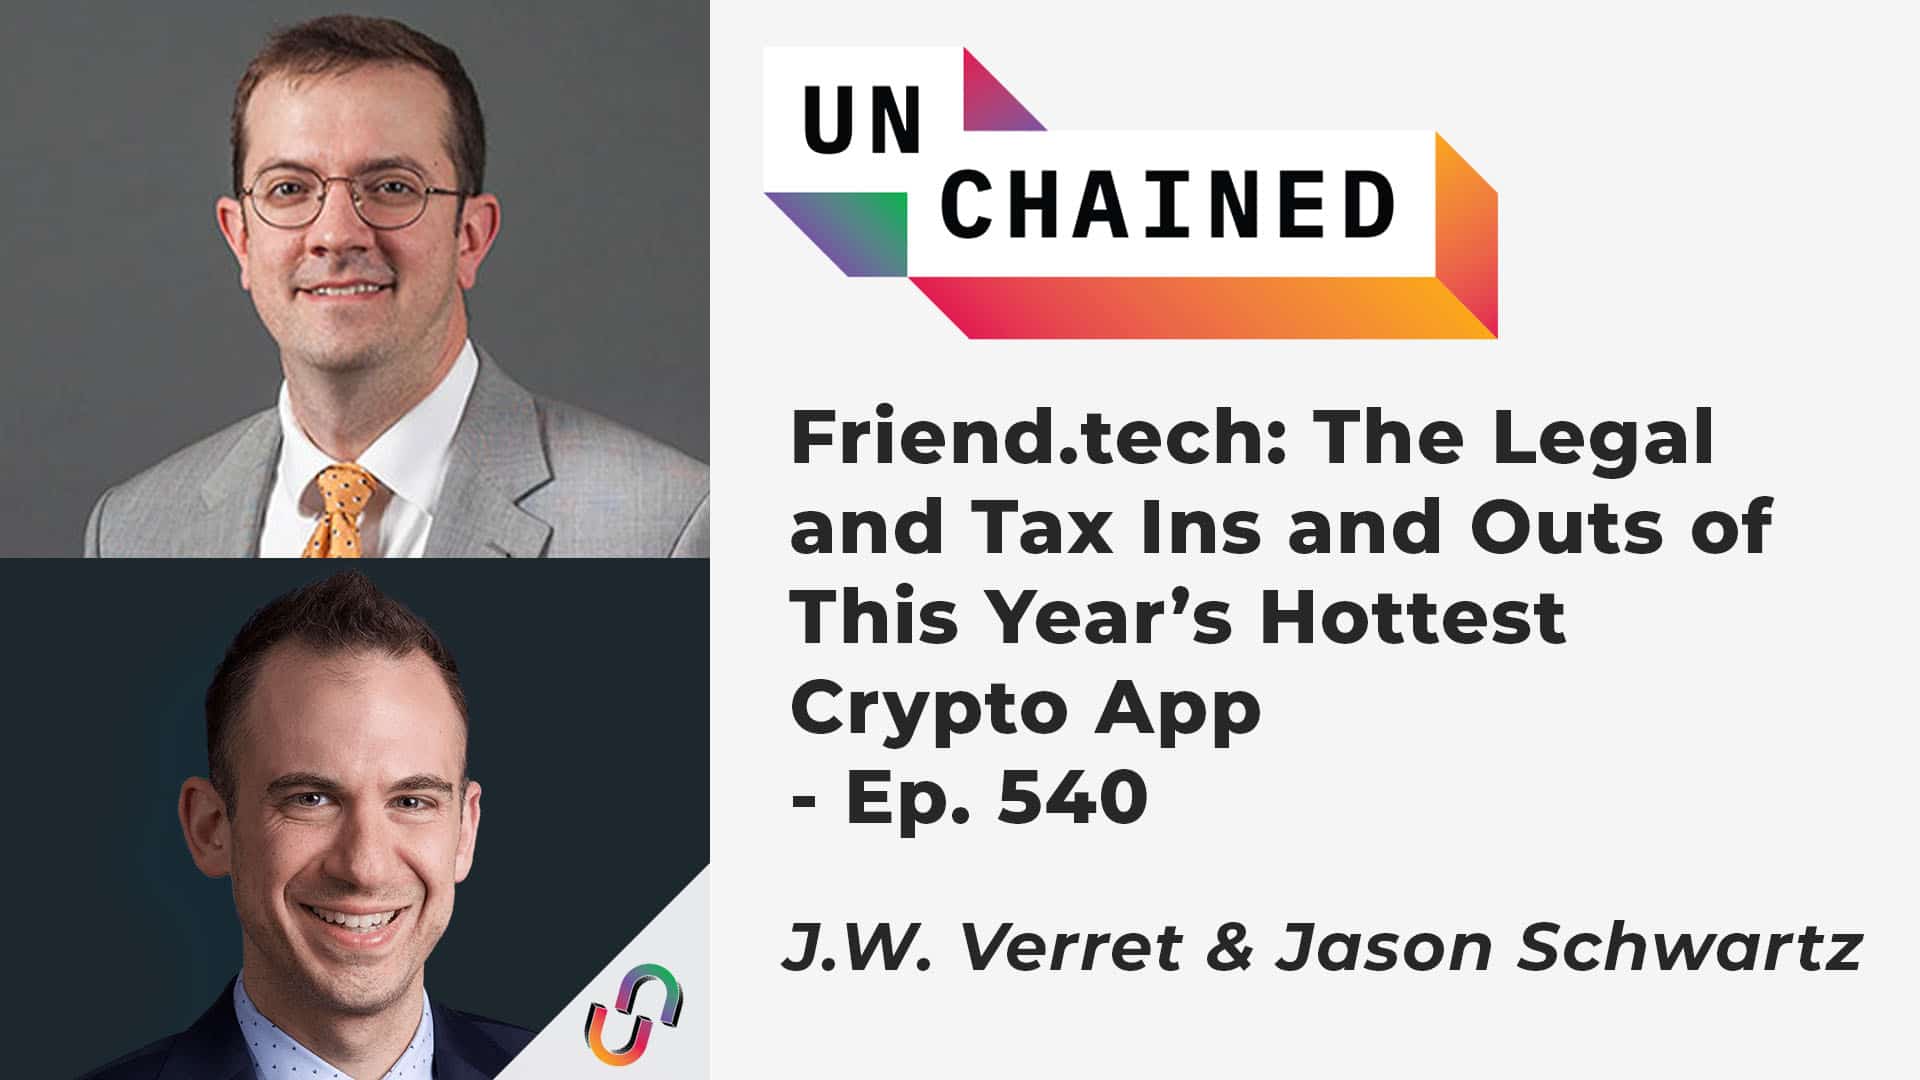 Friend.tech: The Legal and Tax Ins and Outs of This Year’s Hottest Crypto App - Ep. 540